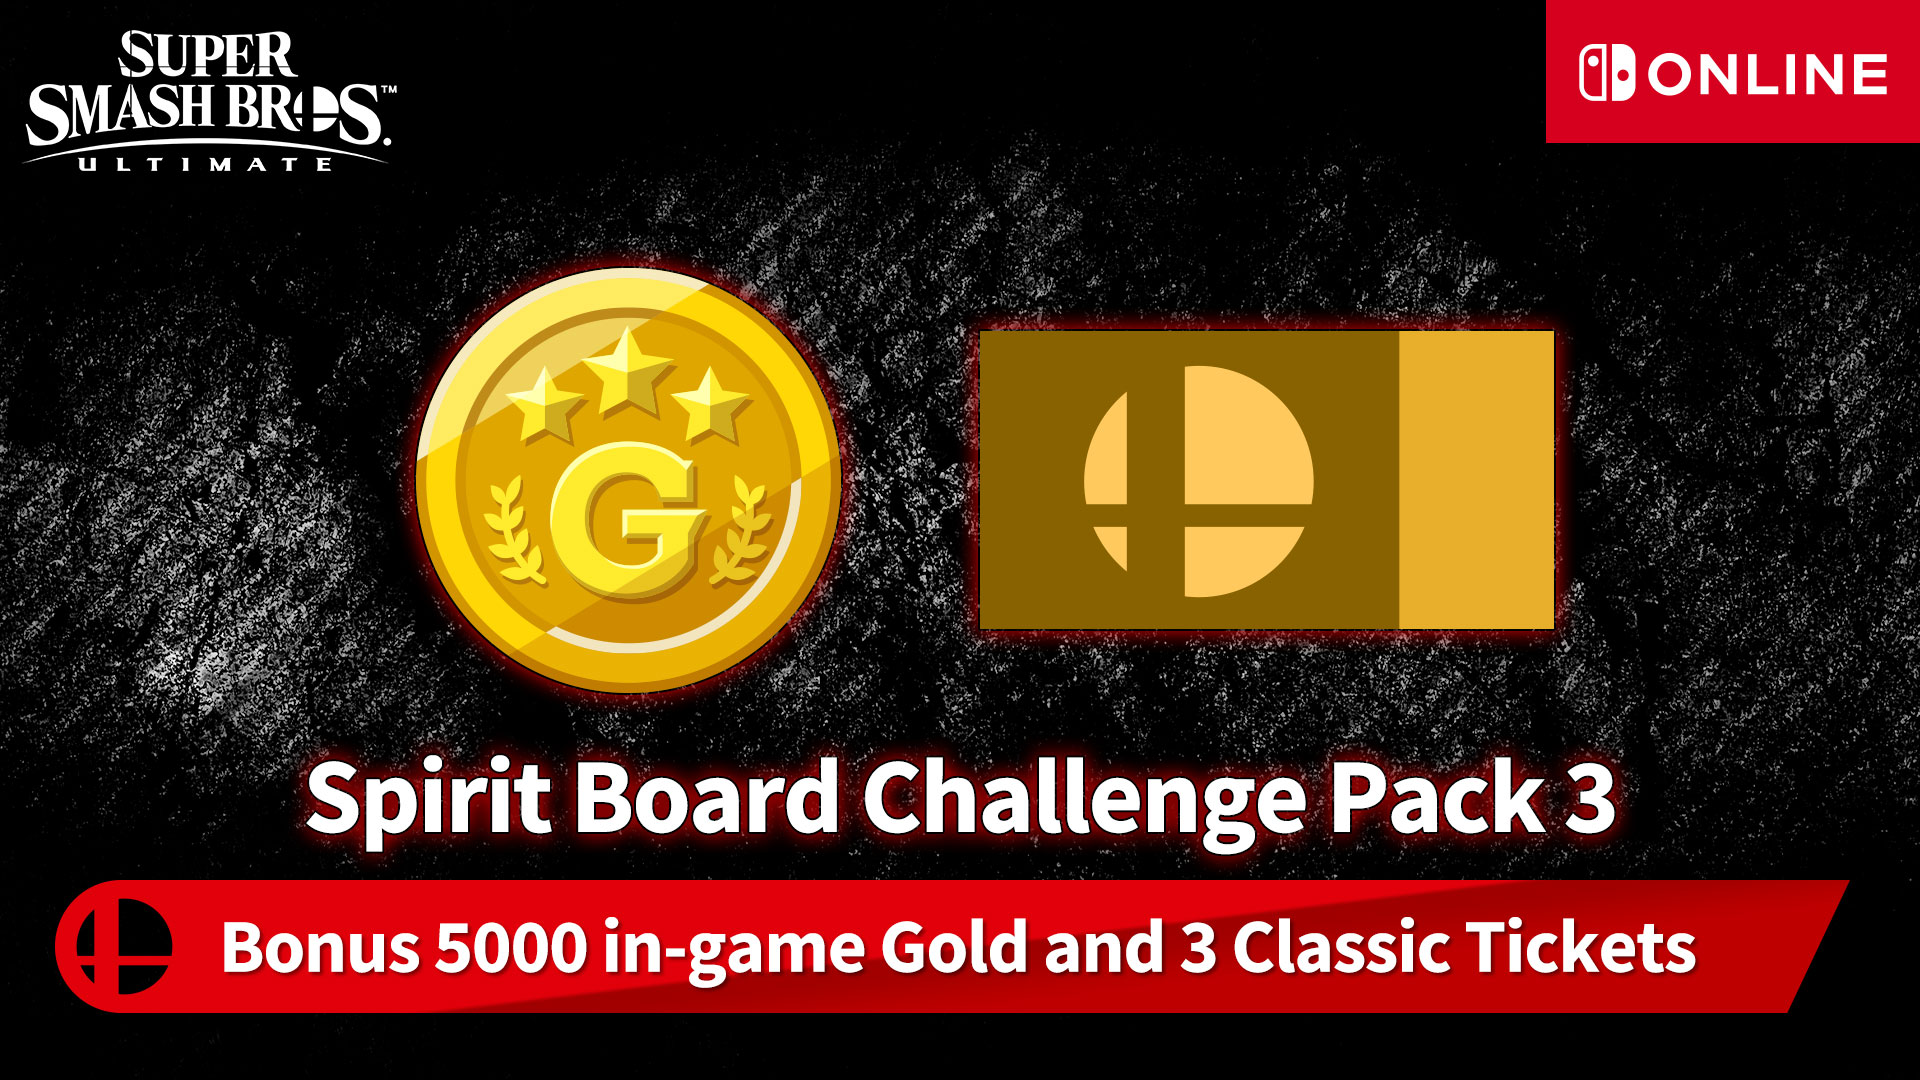 Spirit Board Challenge Pack 3 -Bonus 5000 in-game Gold and 3 Classic Tickets -